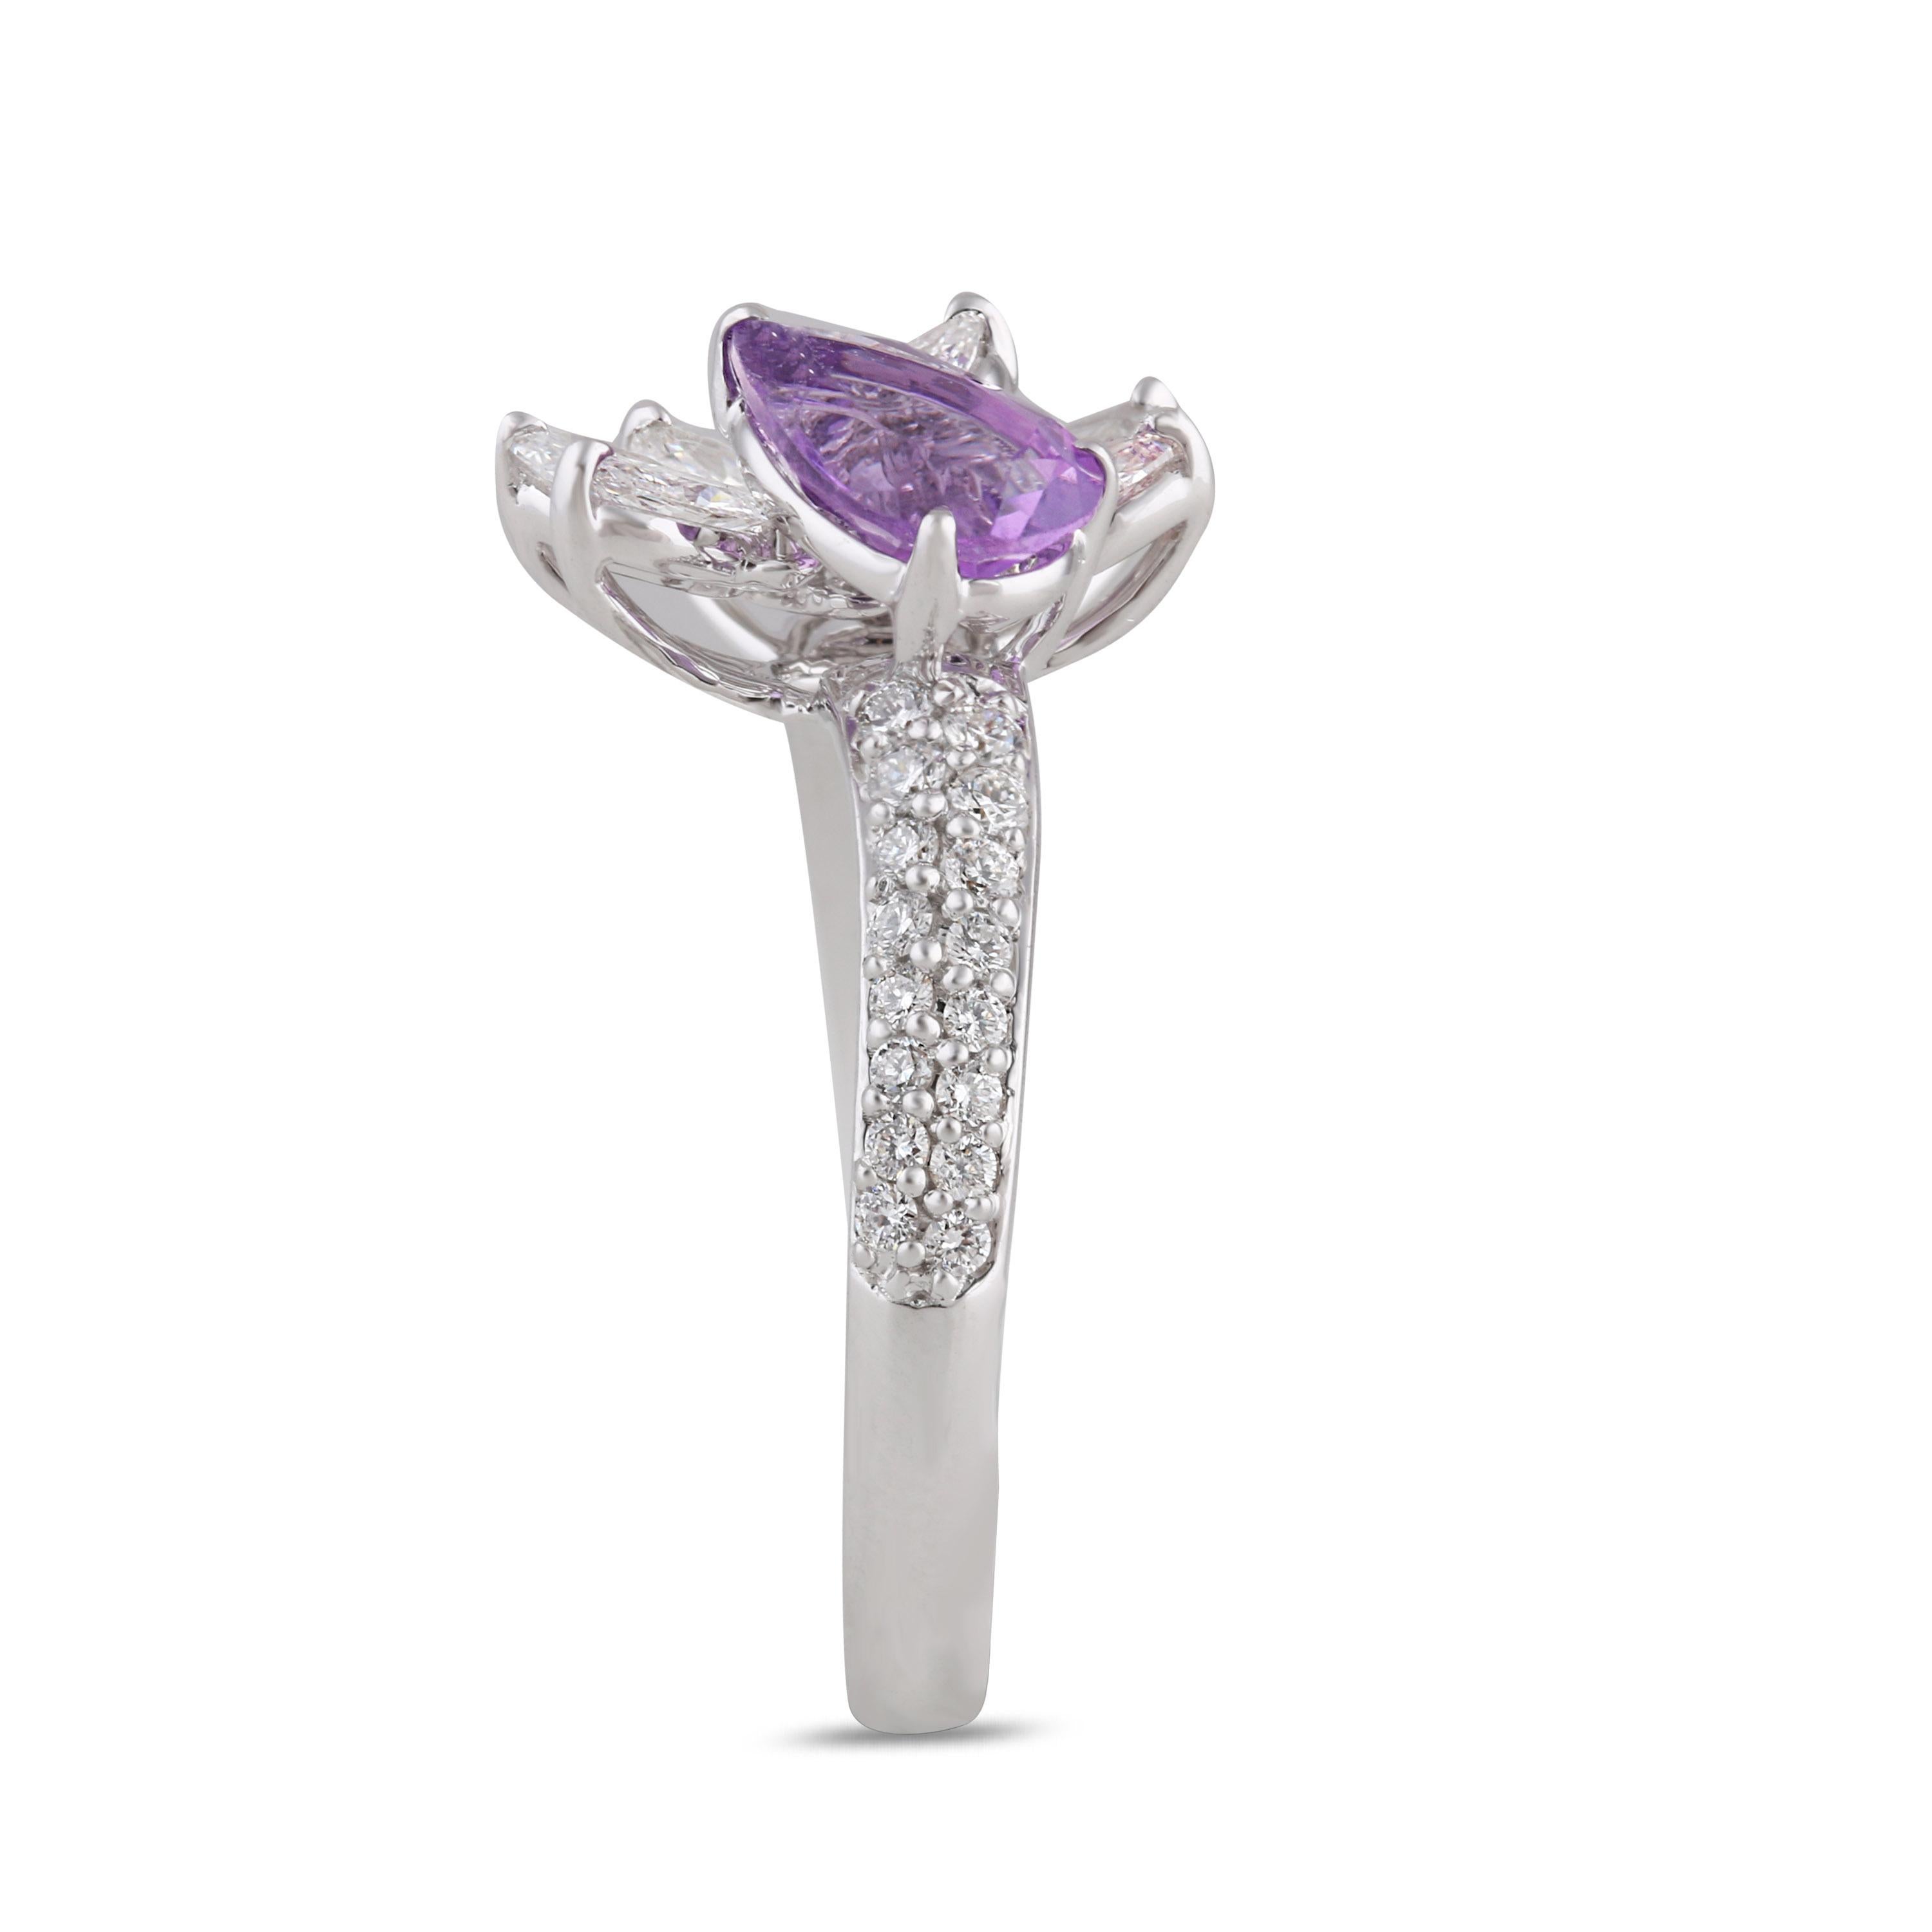 Studio Rêves Diamond Ring with Amethyst in 18 Karat White Gold In New Condition For Sale In Mumbai, Maharashtra